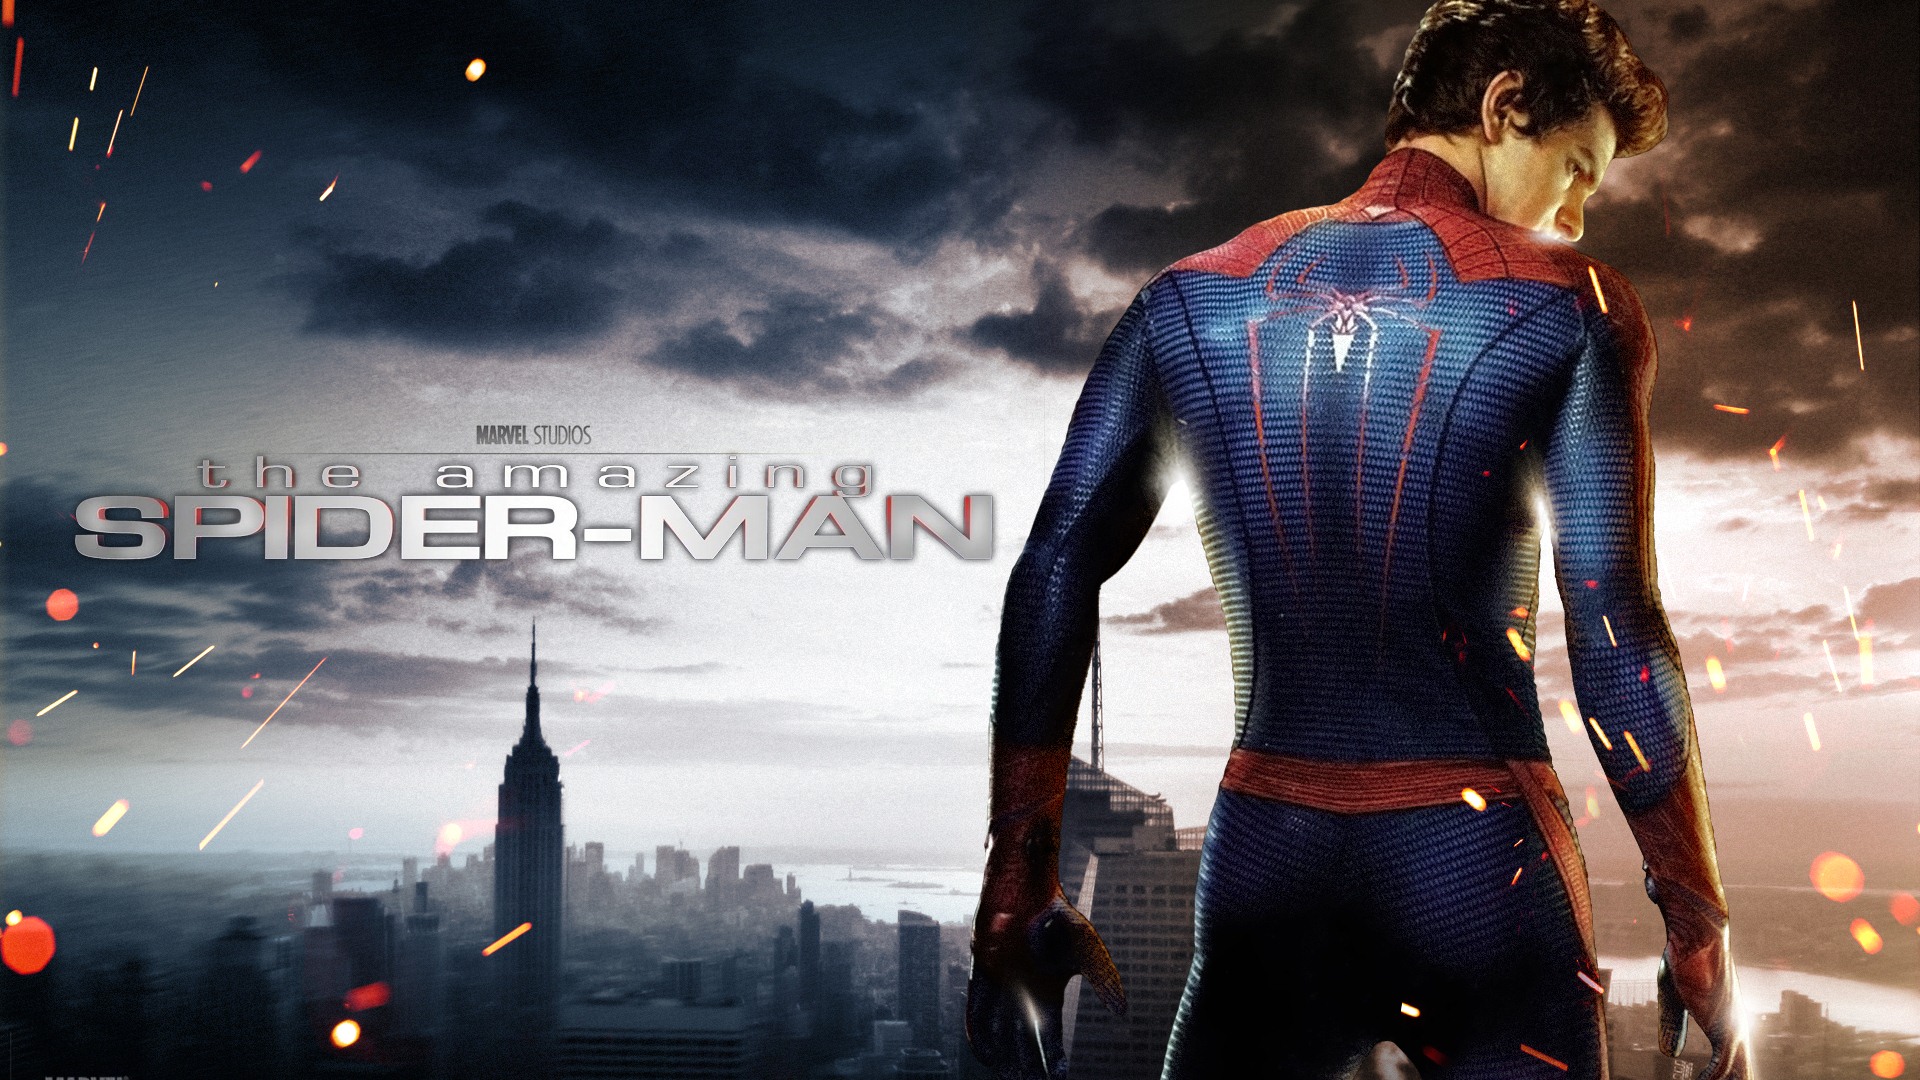 Le 2012 Amazing Spider-Man wallpapers #1 - 1920x1080